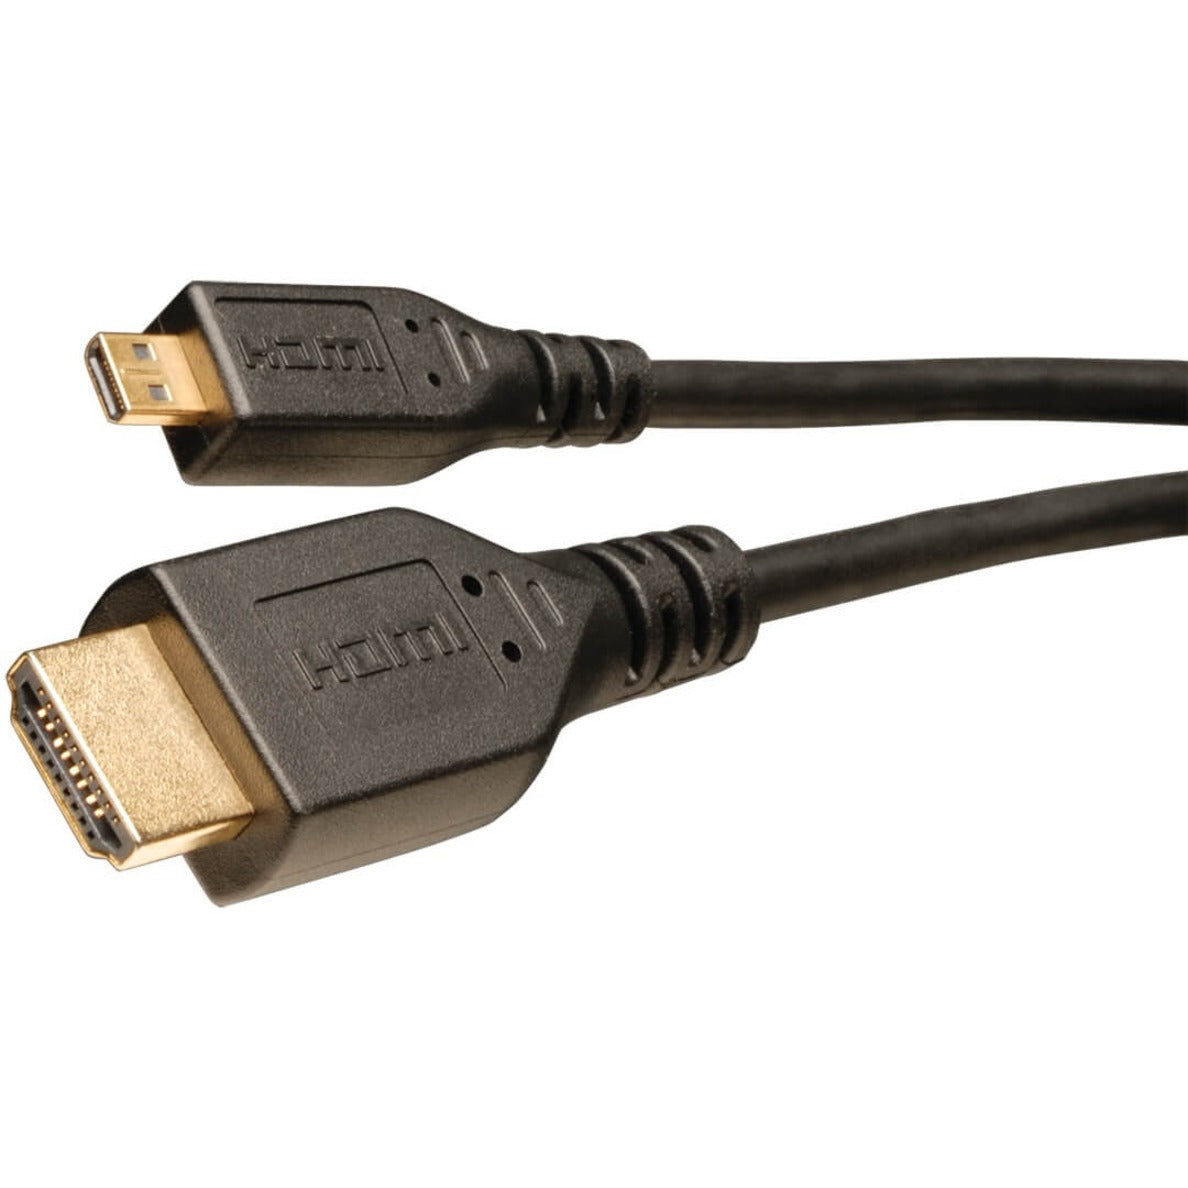 Tripp Lite P570-006-MICRO 6-ft. HDMI to Micro HDMI High Speed w/Ethernet Cable, Gold-Plated Connectors, Black